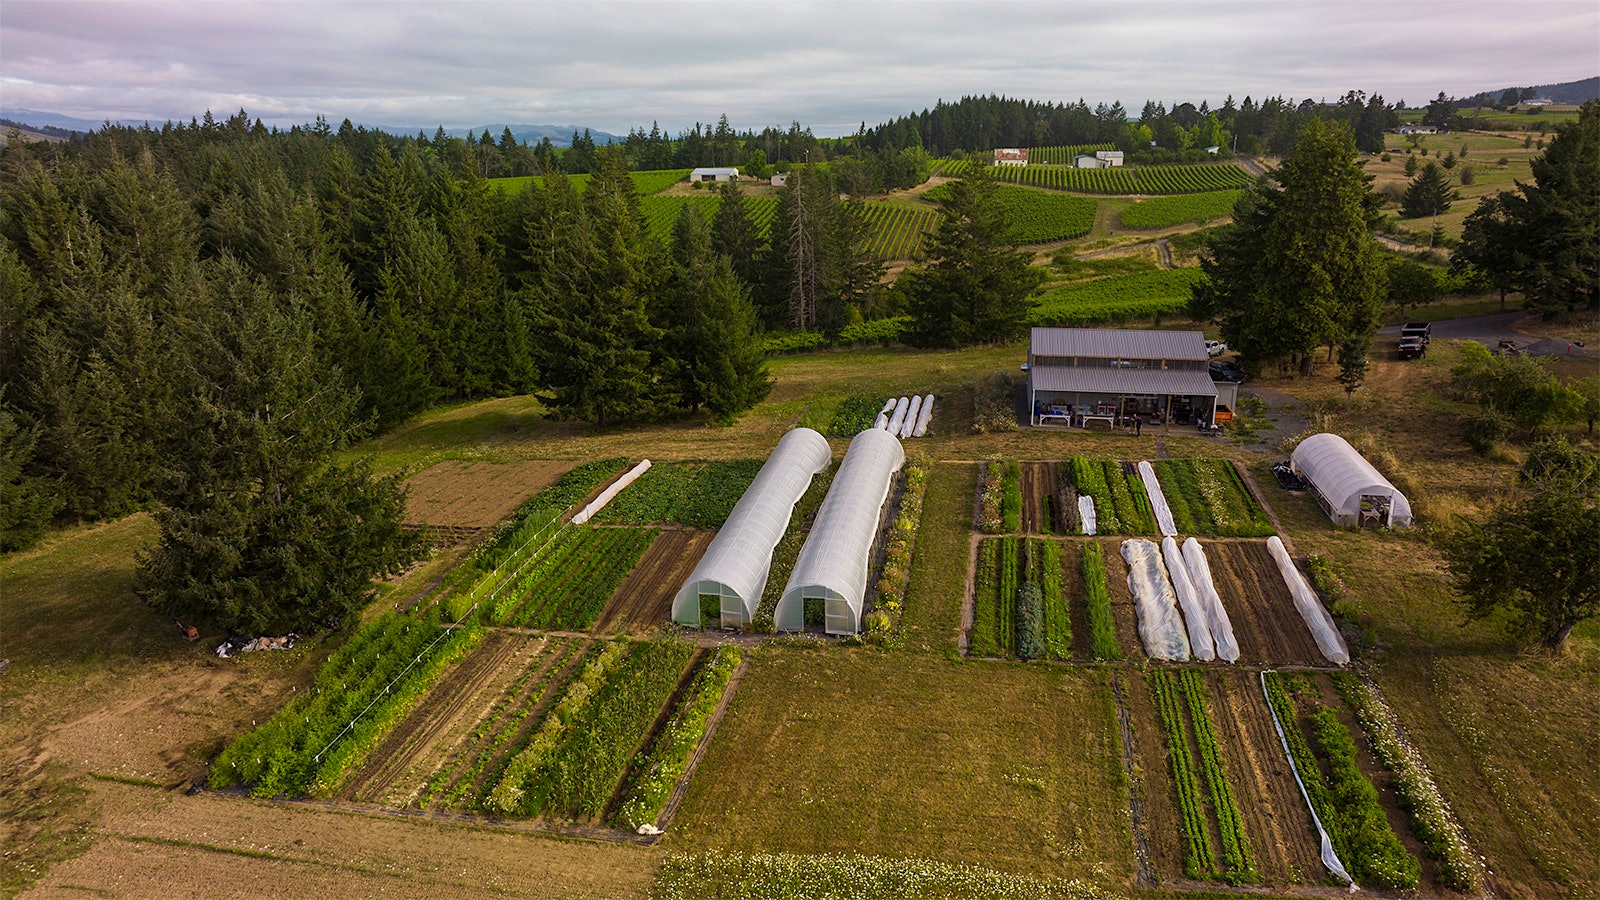  Aerial view of a Willamette Valley farm with hoop houses and fields of vegetables